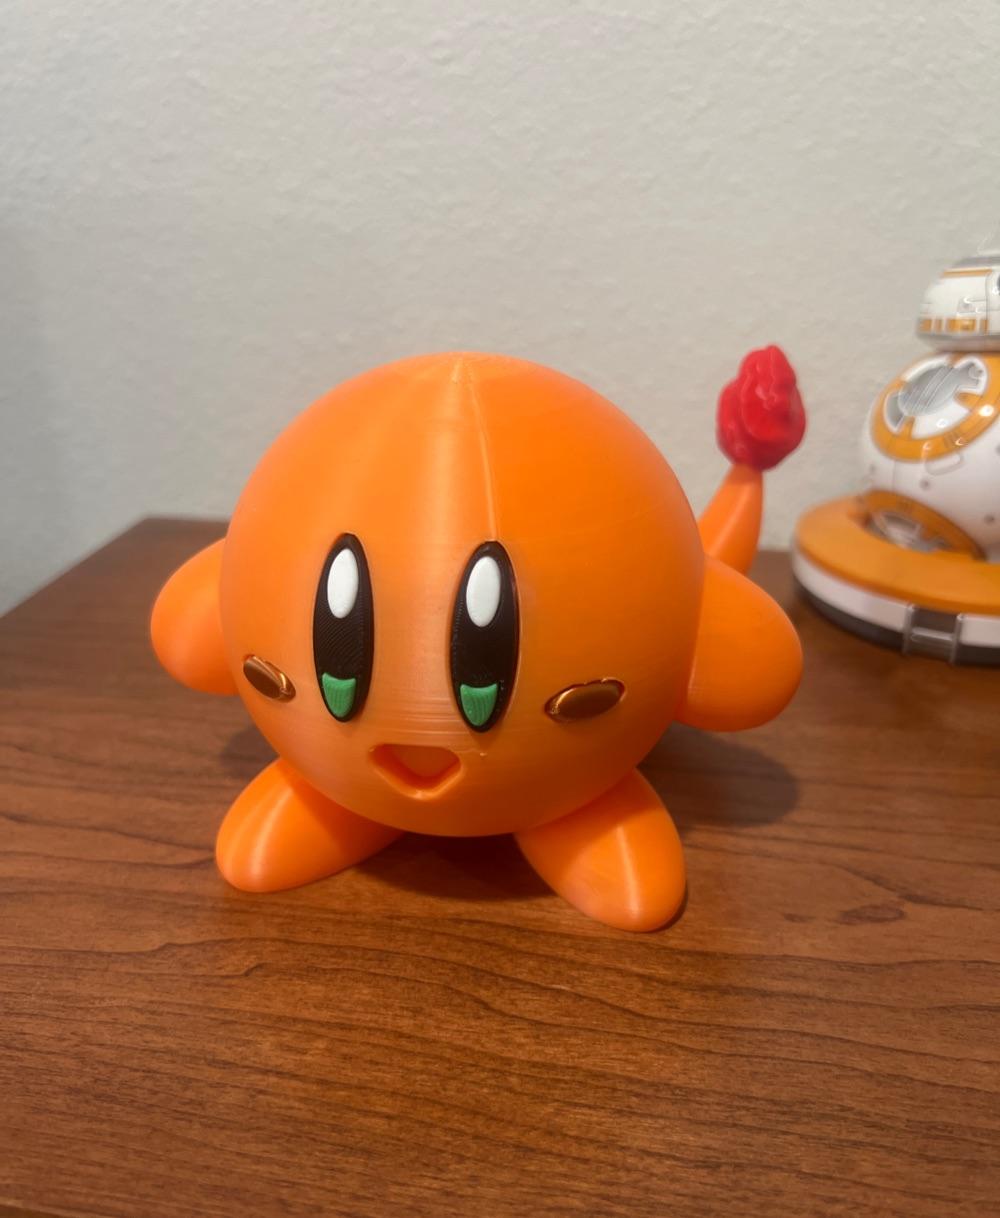 Charmander kirby  - Great model. I’m liking the Kirby variations. - 3d model